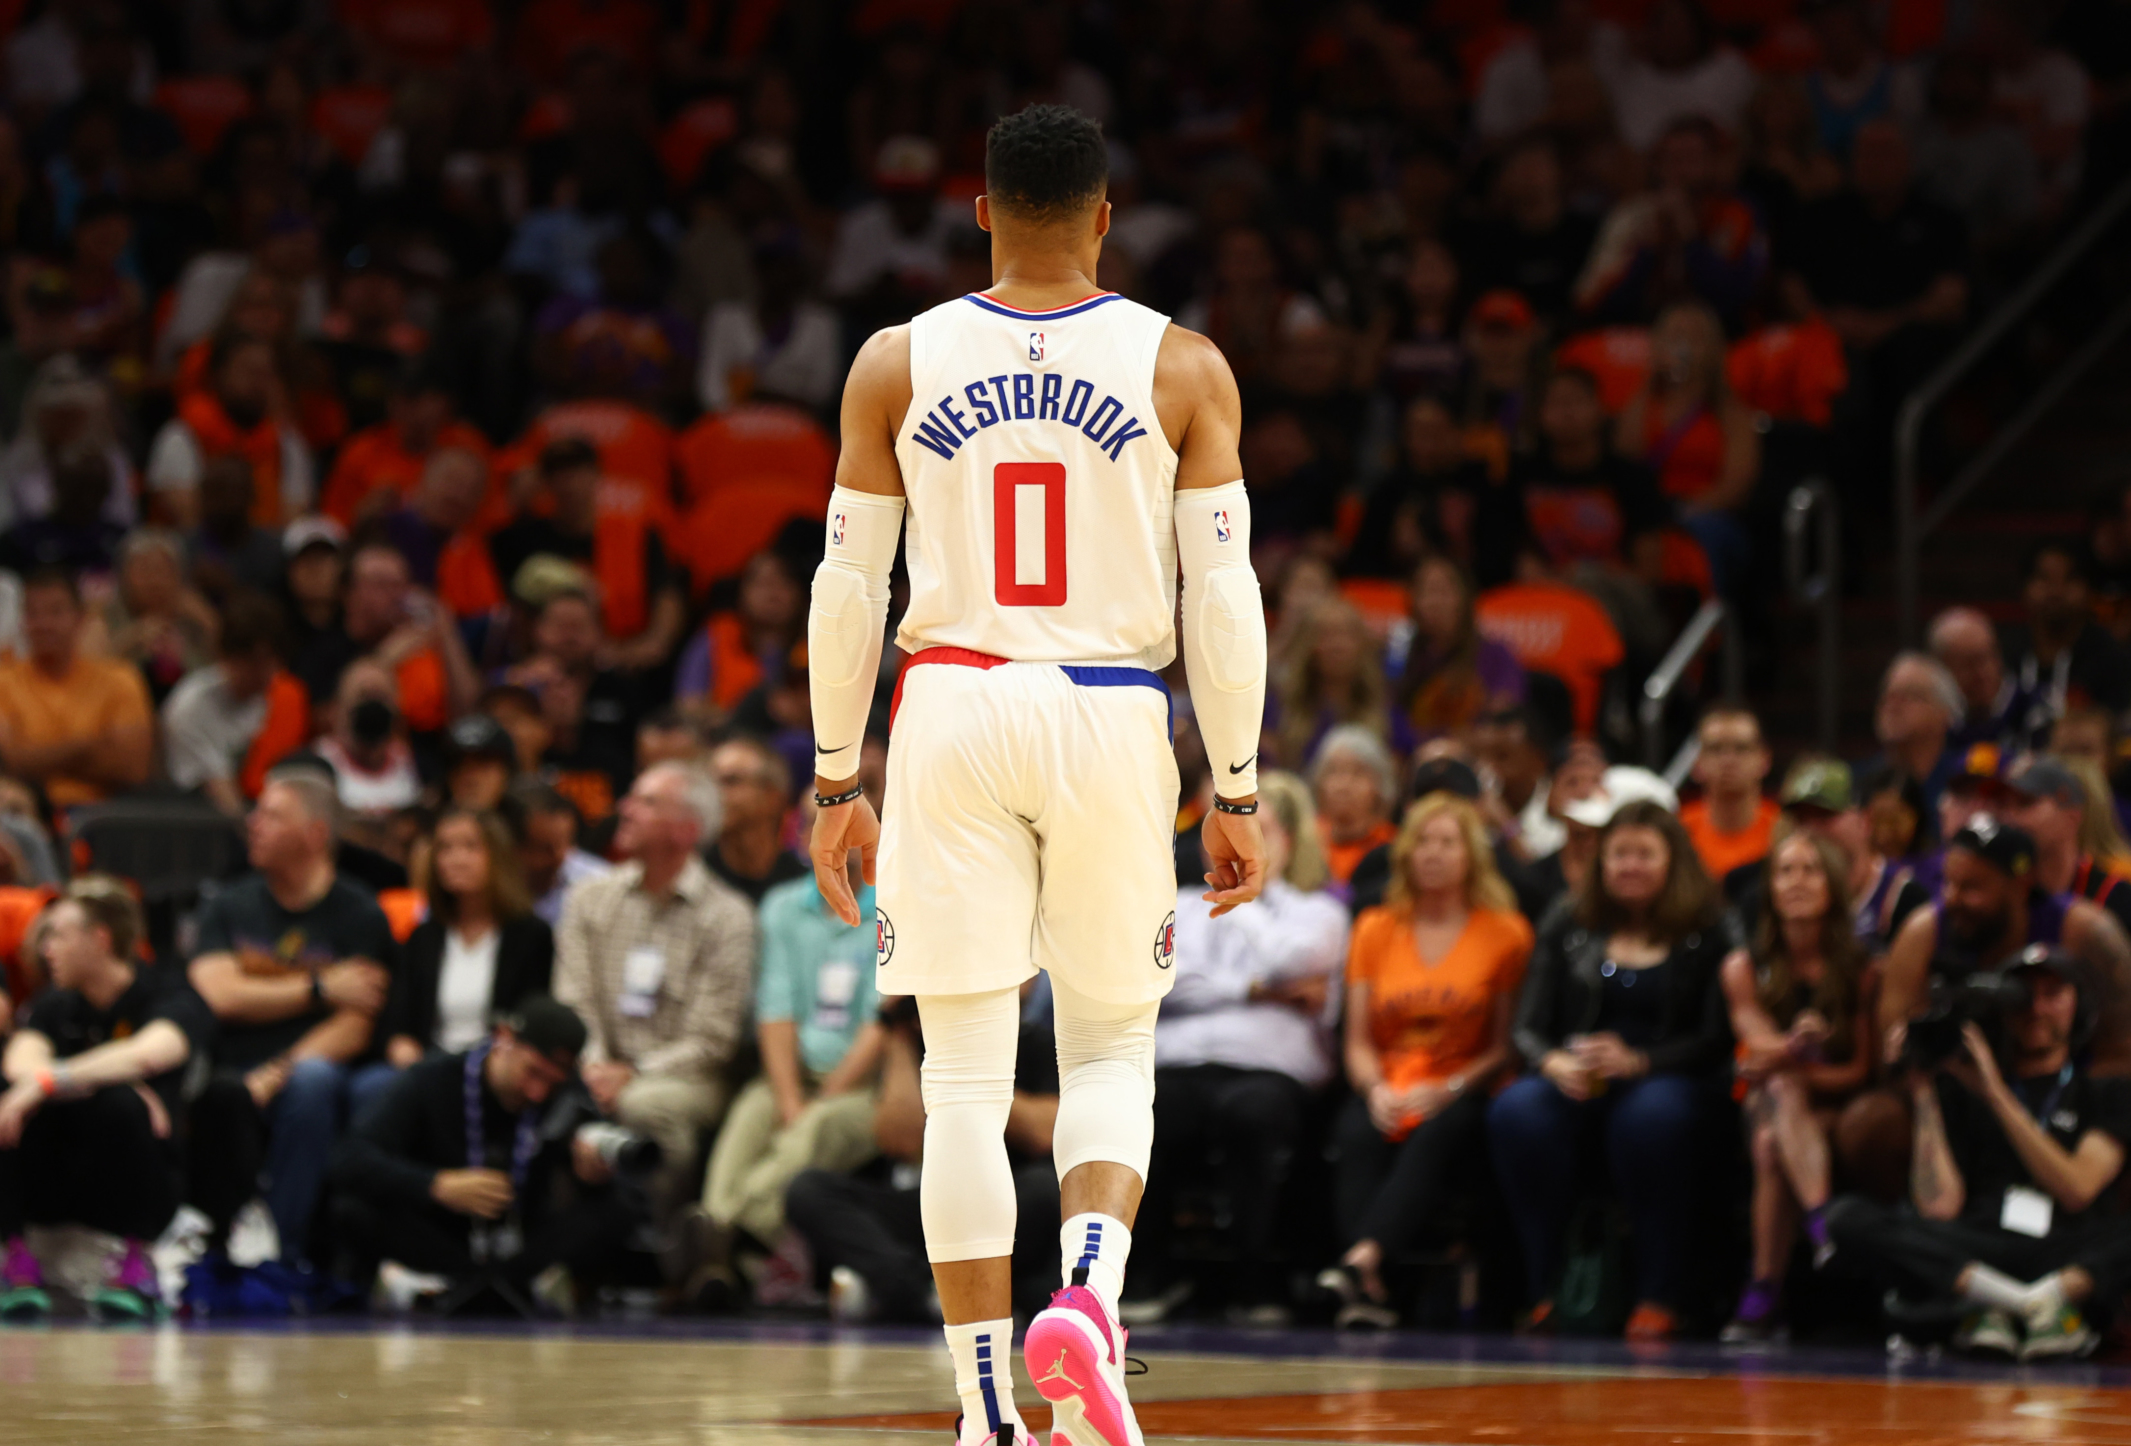 NBA fans stunned by Russell Westbrook's new contract